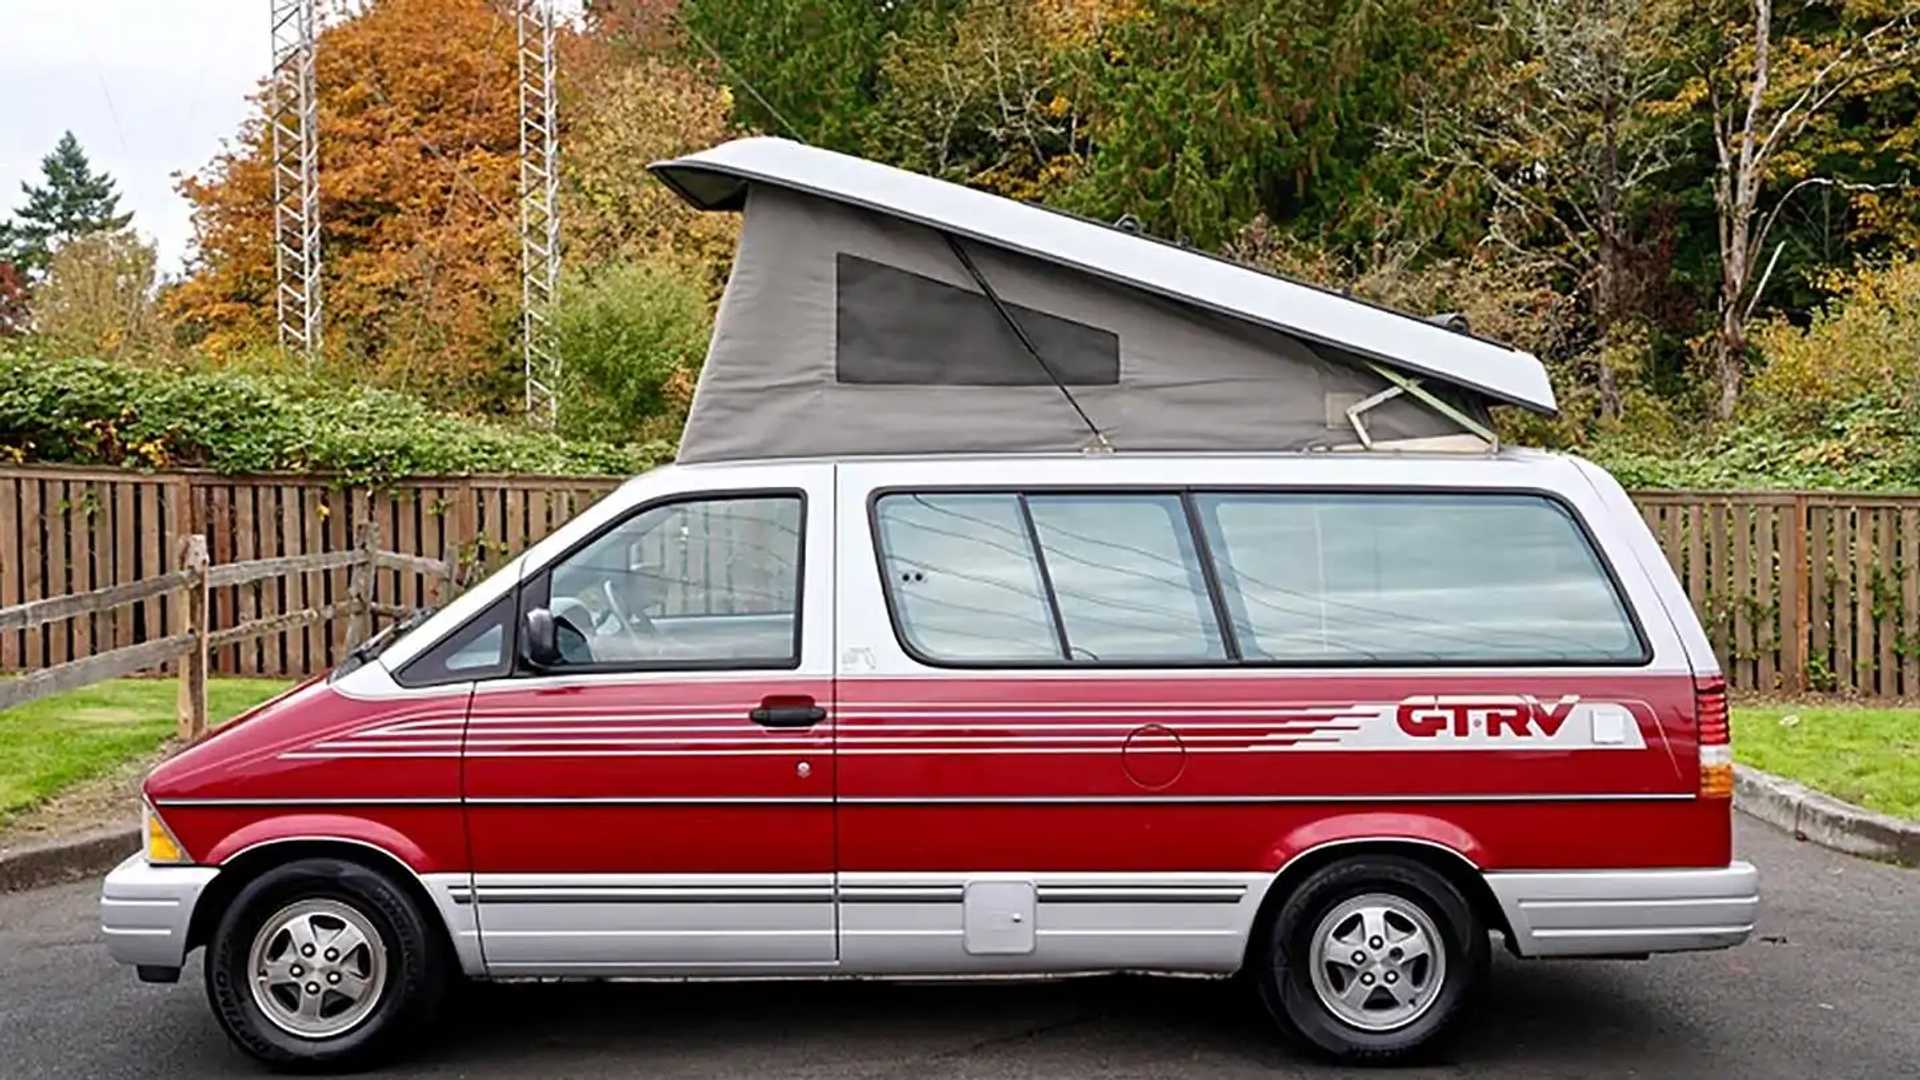 Start Camping Easy With This Mint 1997 Ford Aerostar GTRV For $5,500